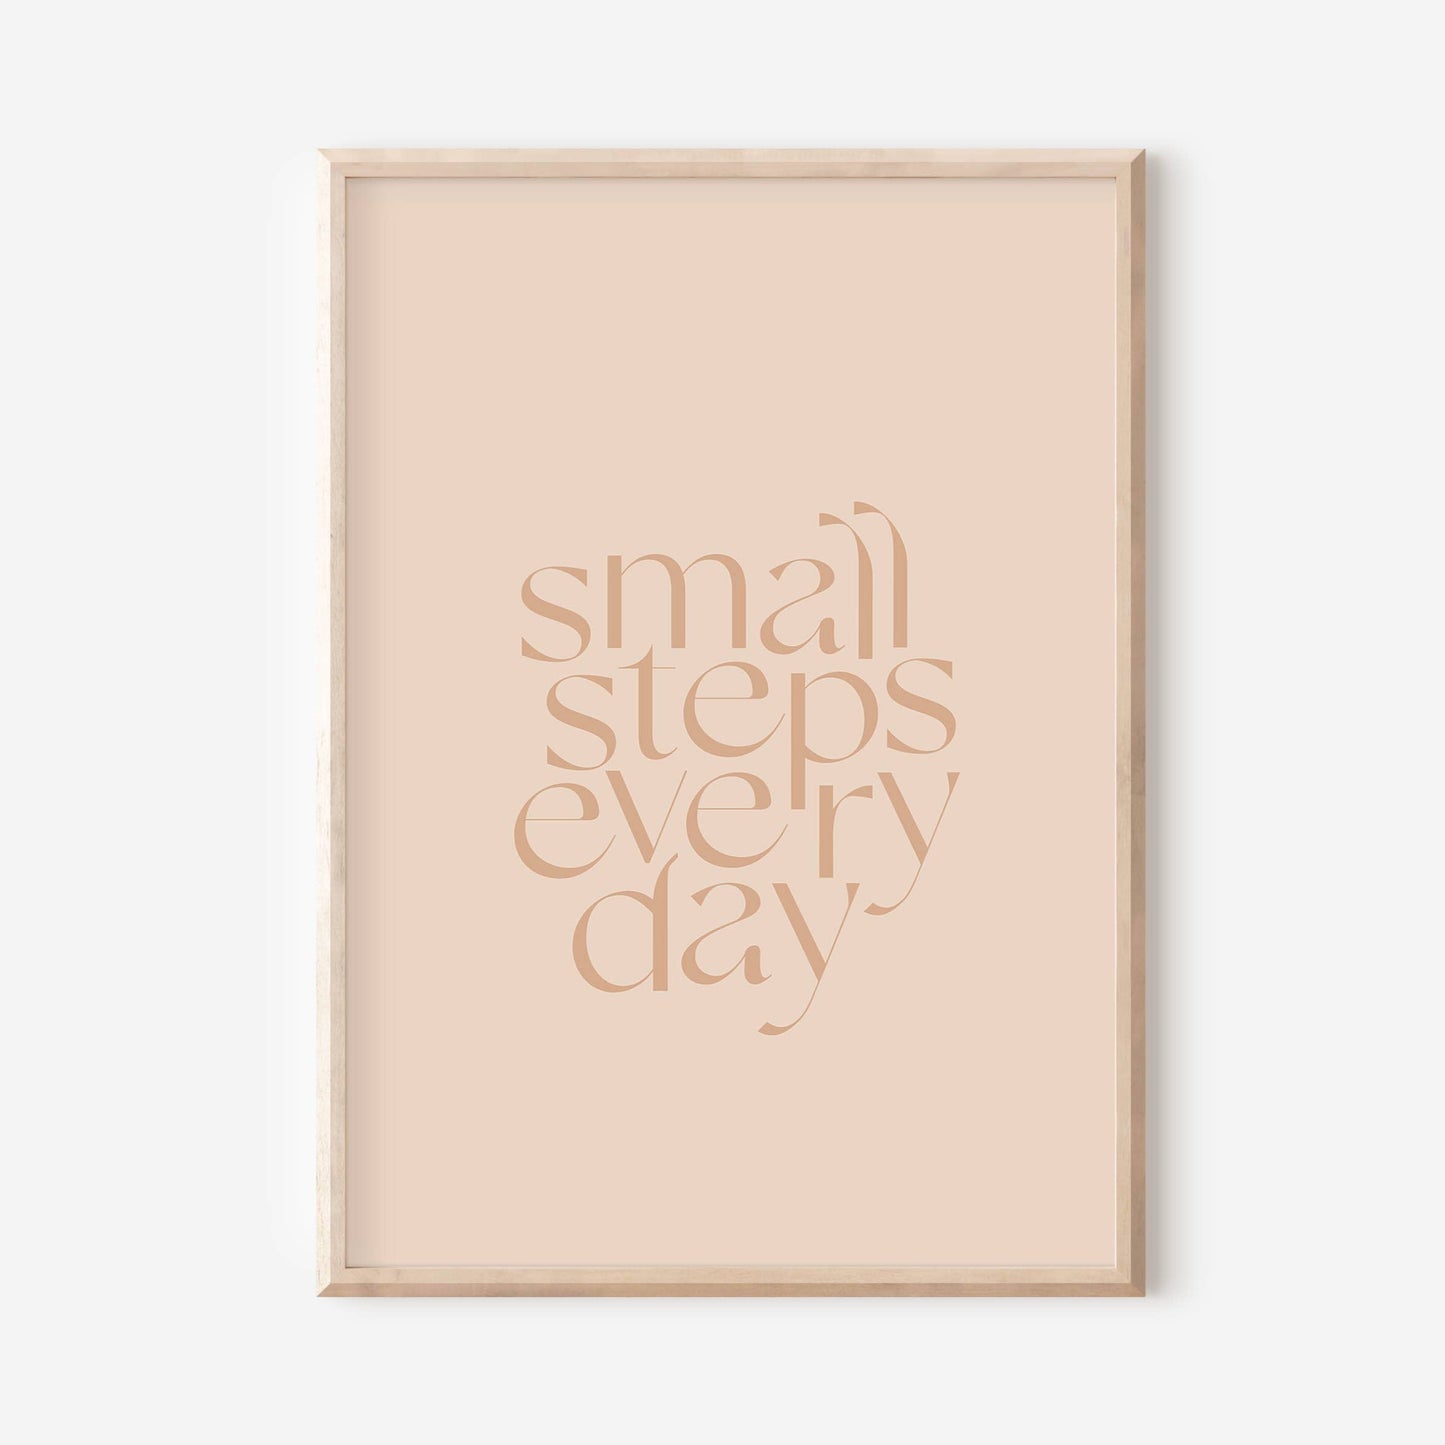 'Small Steps Every Day' Print